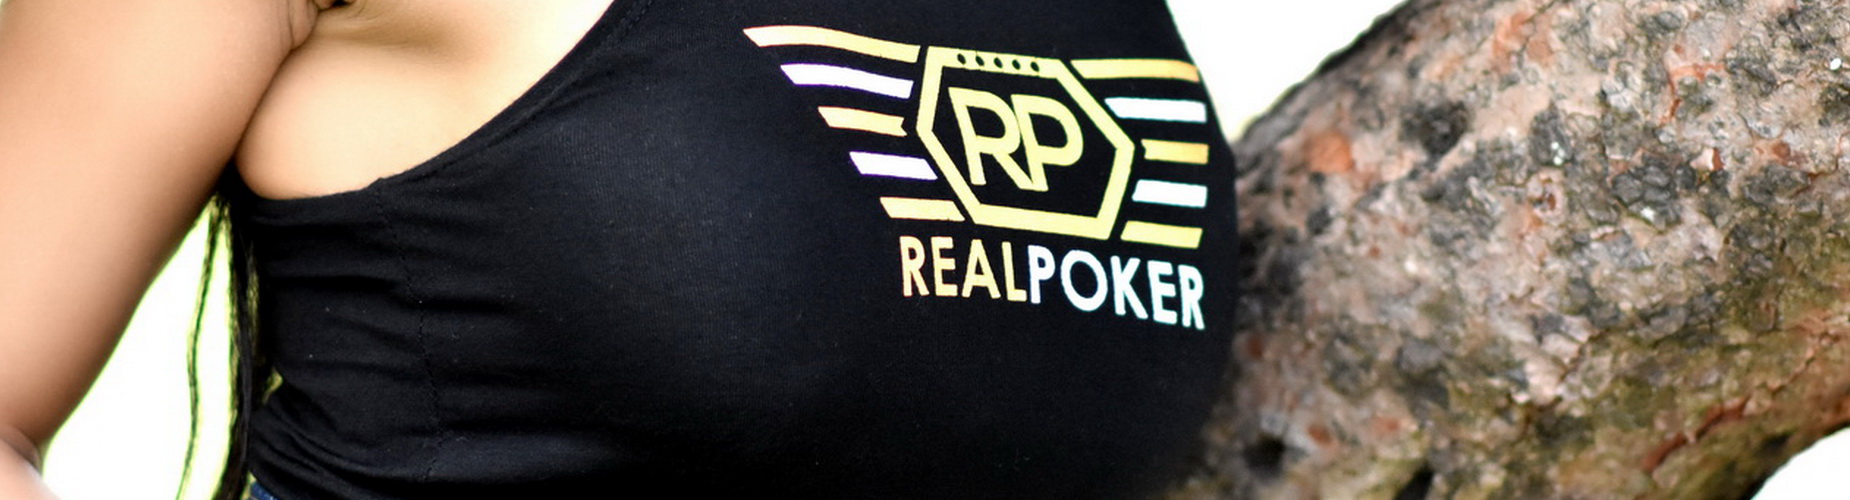 Enjoy the Real Poker store